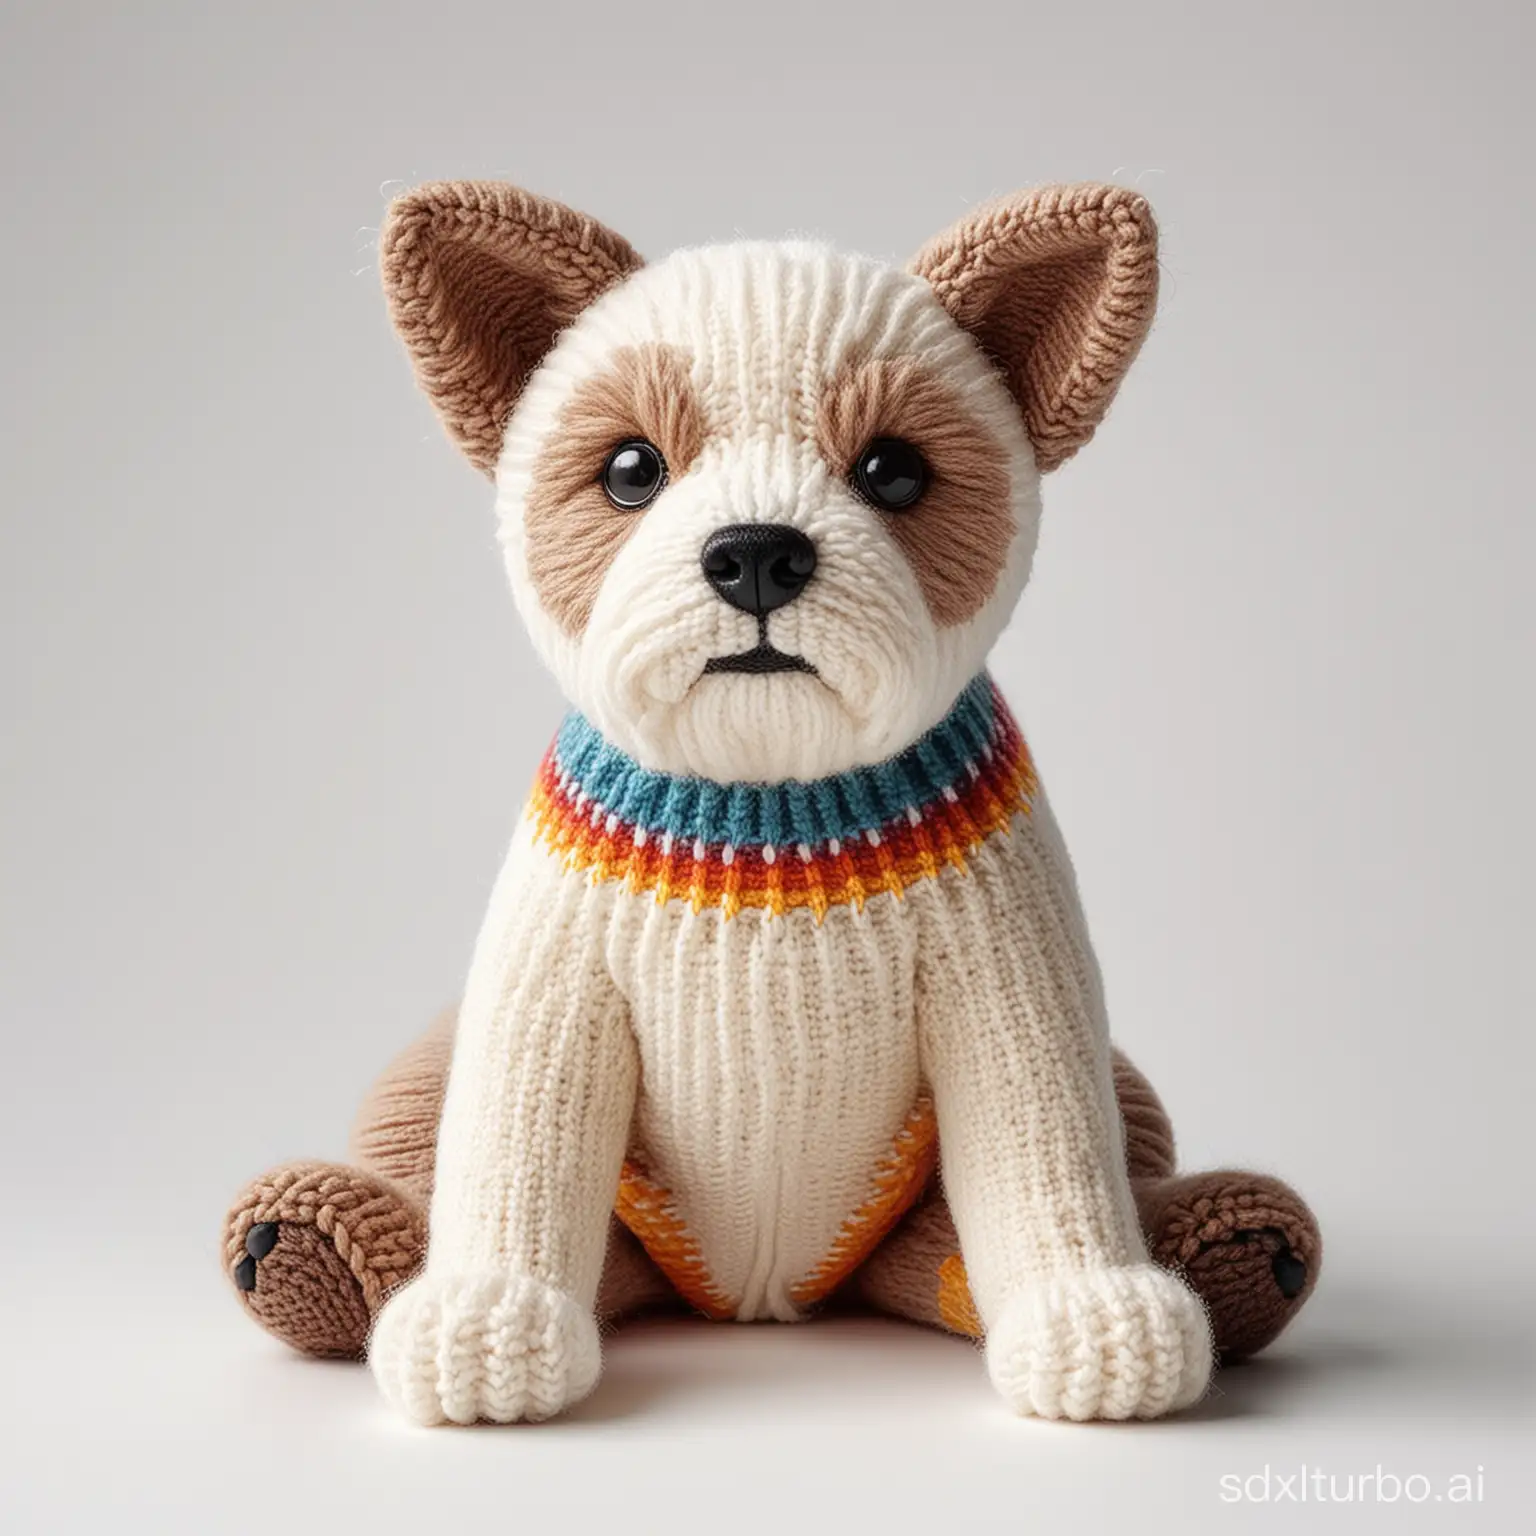 cute realistic knitted Dog, on a white background, in the style of product photography, knit art, colorful design